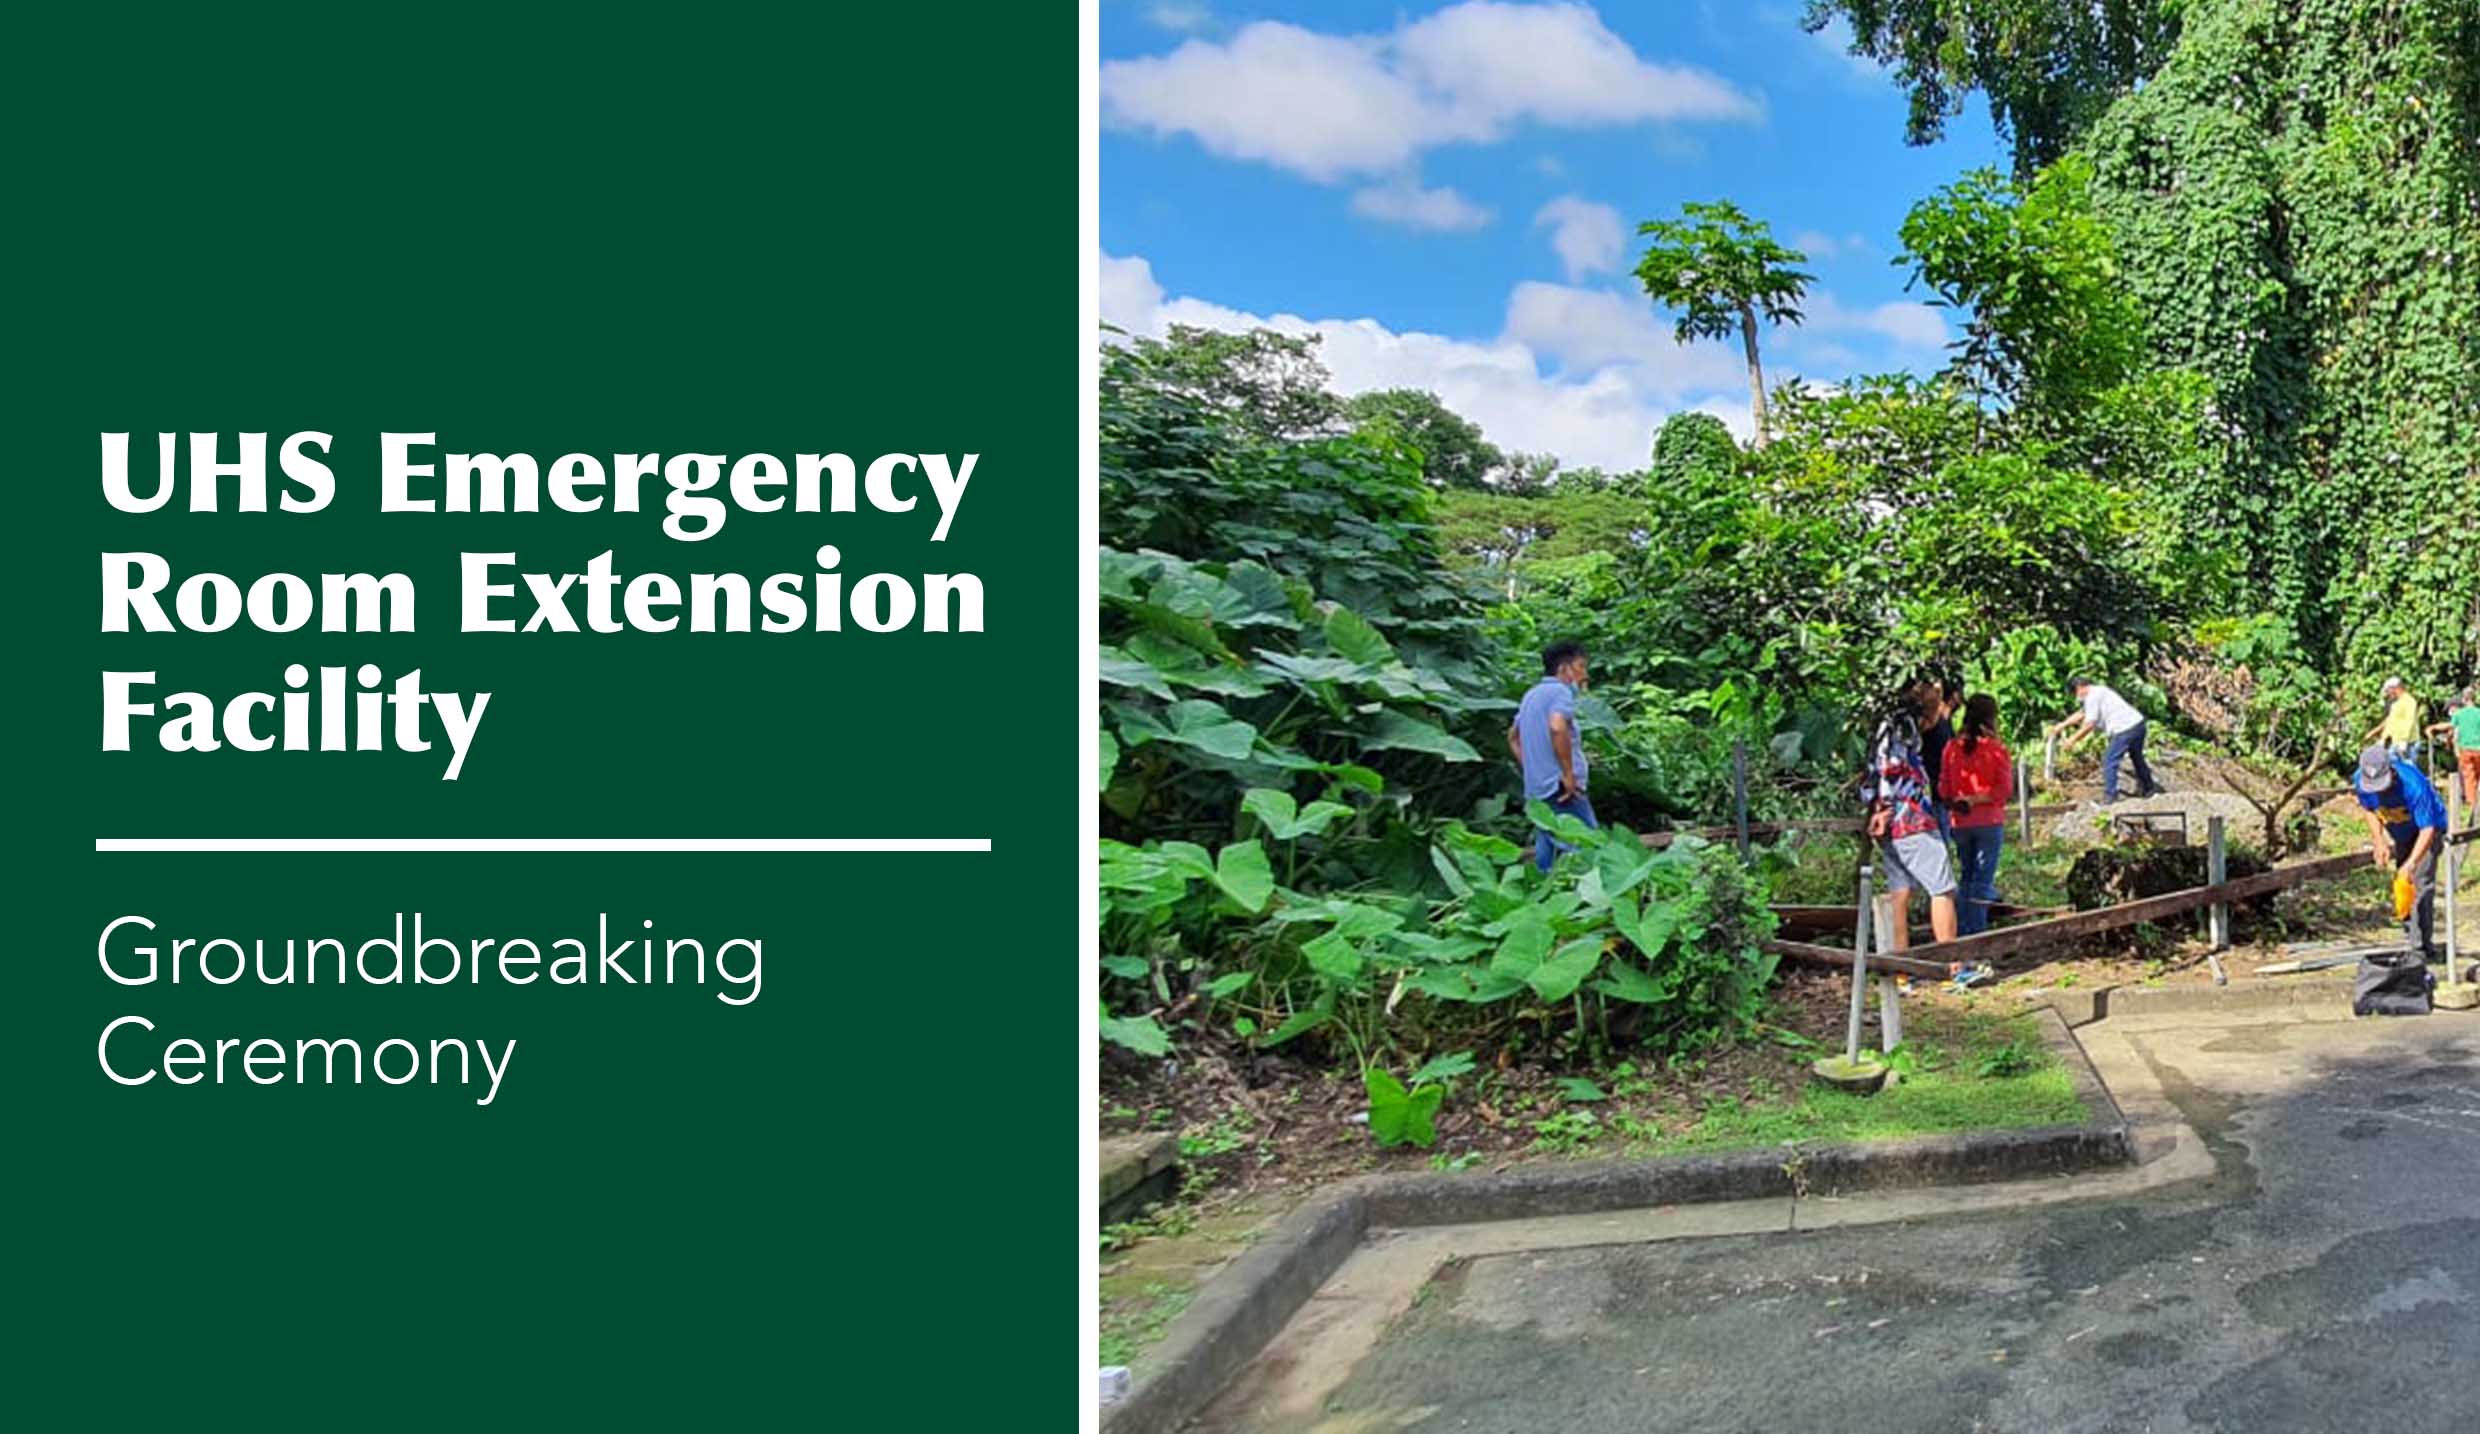 UPLB to break ground for UHS Emergency Room Extension project